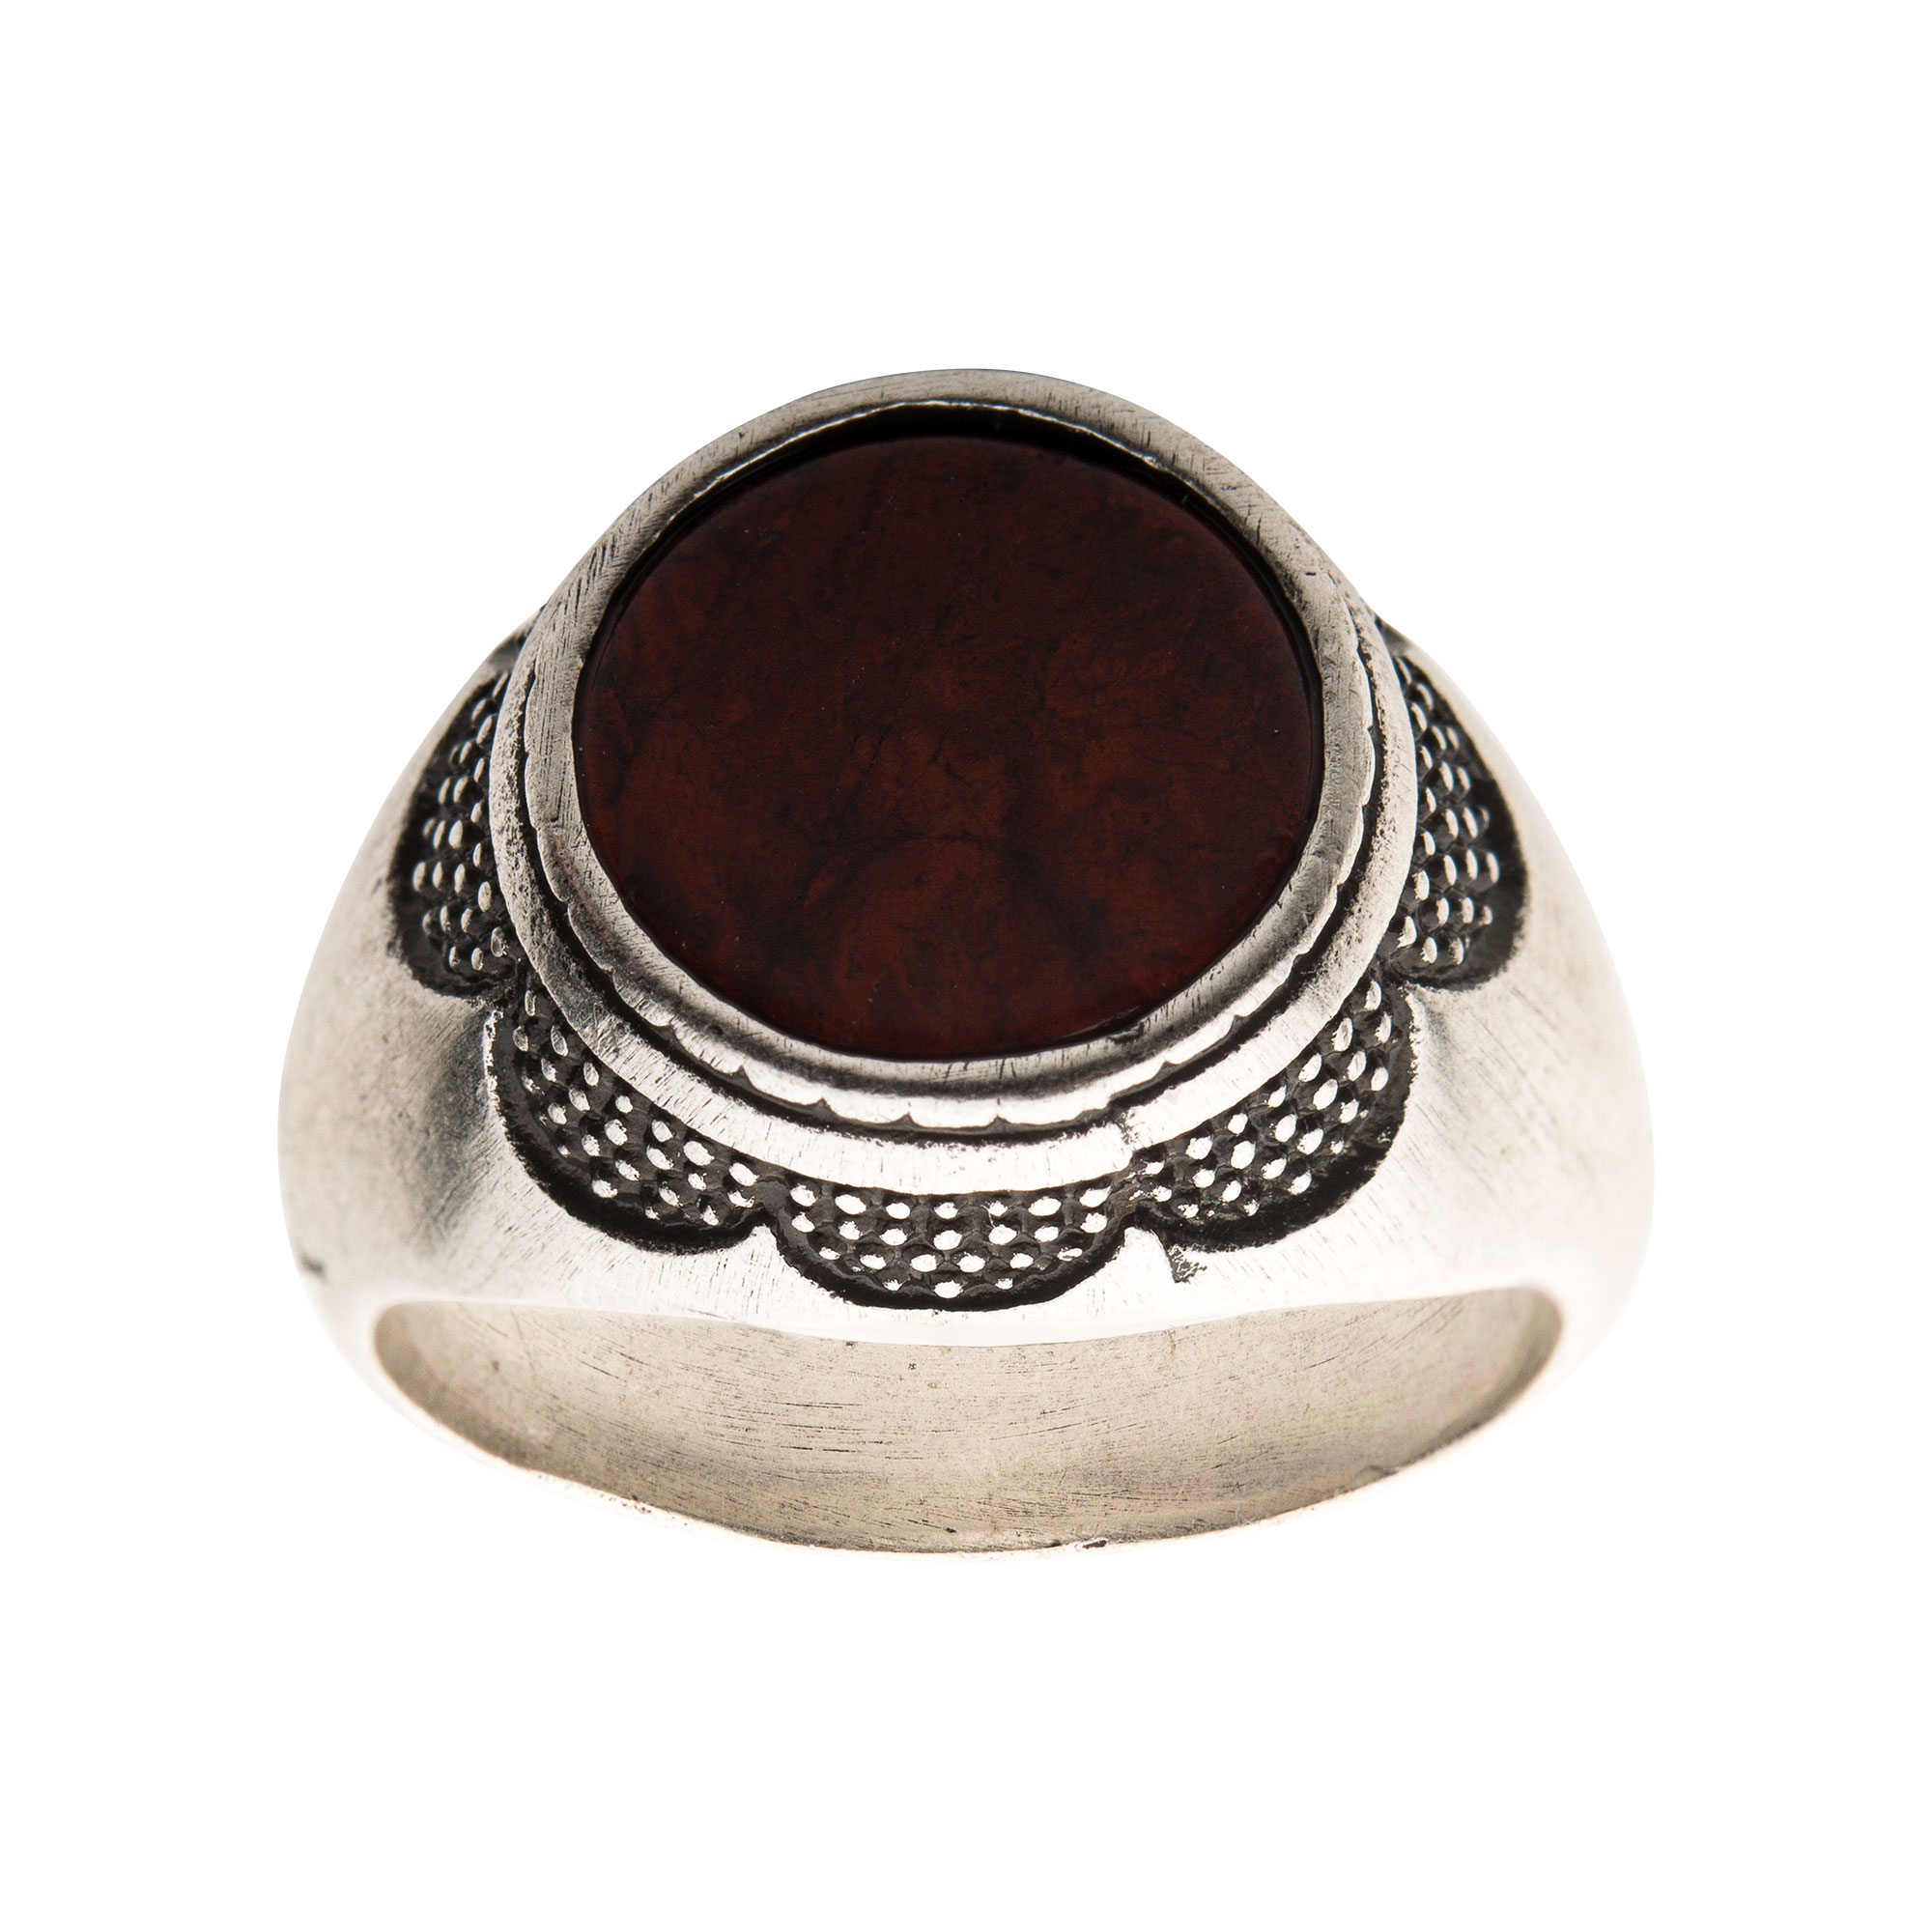 Stainless Steel Silver Plated with Red Jasper Stone Ring Image 2 Ken Walker Jewelers Gig Harbor, WA